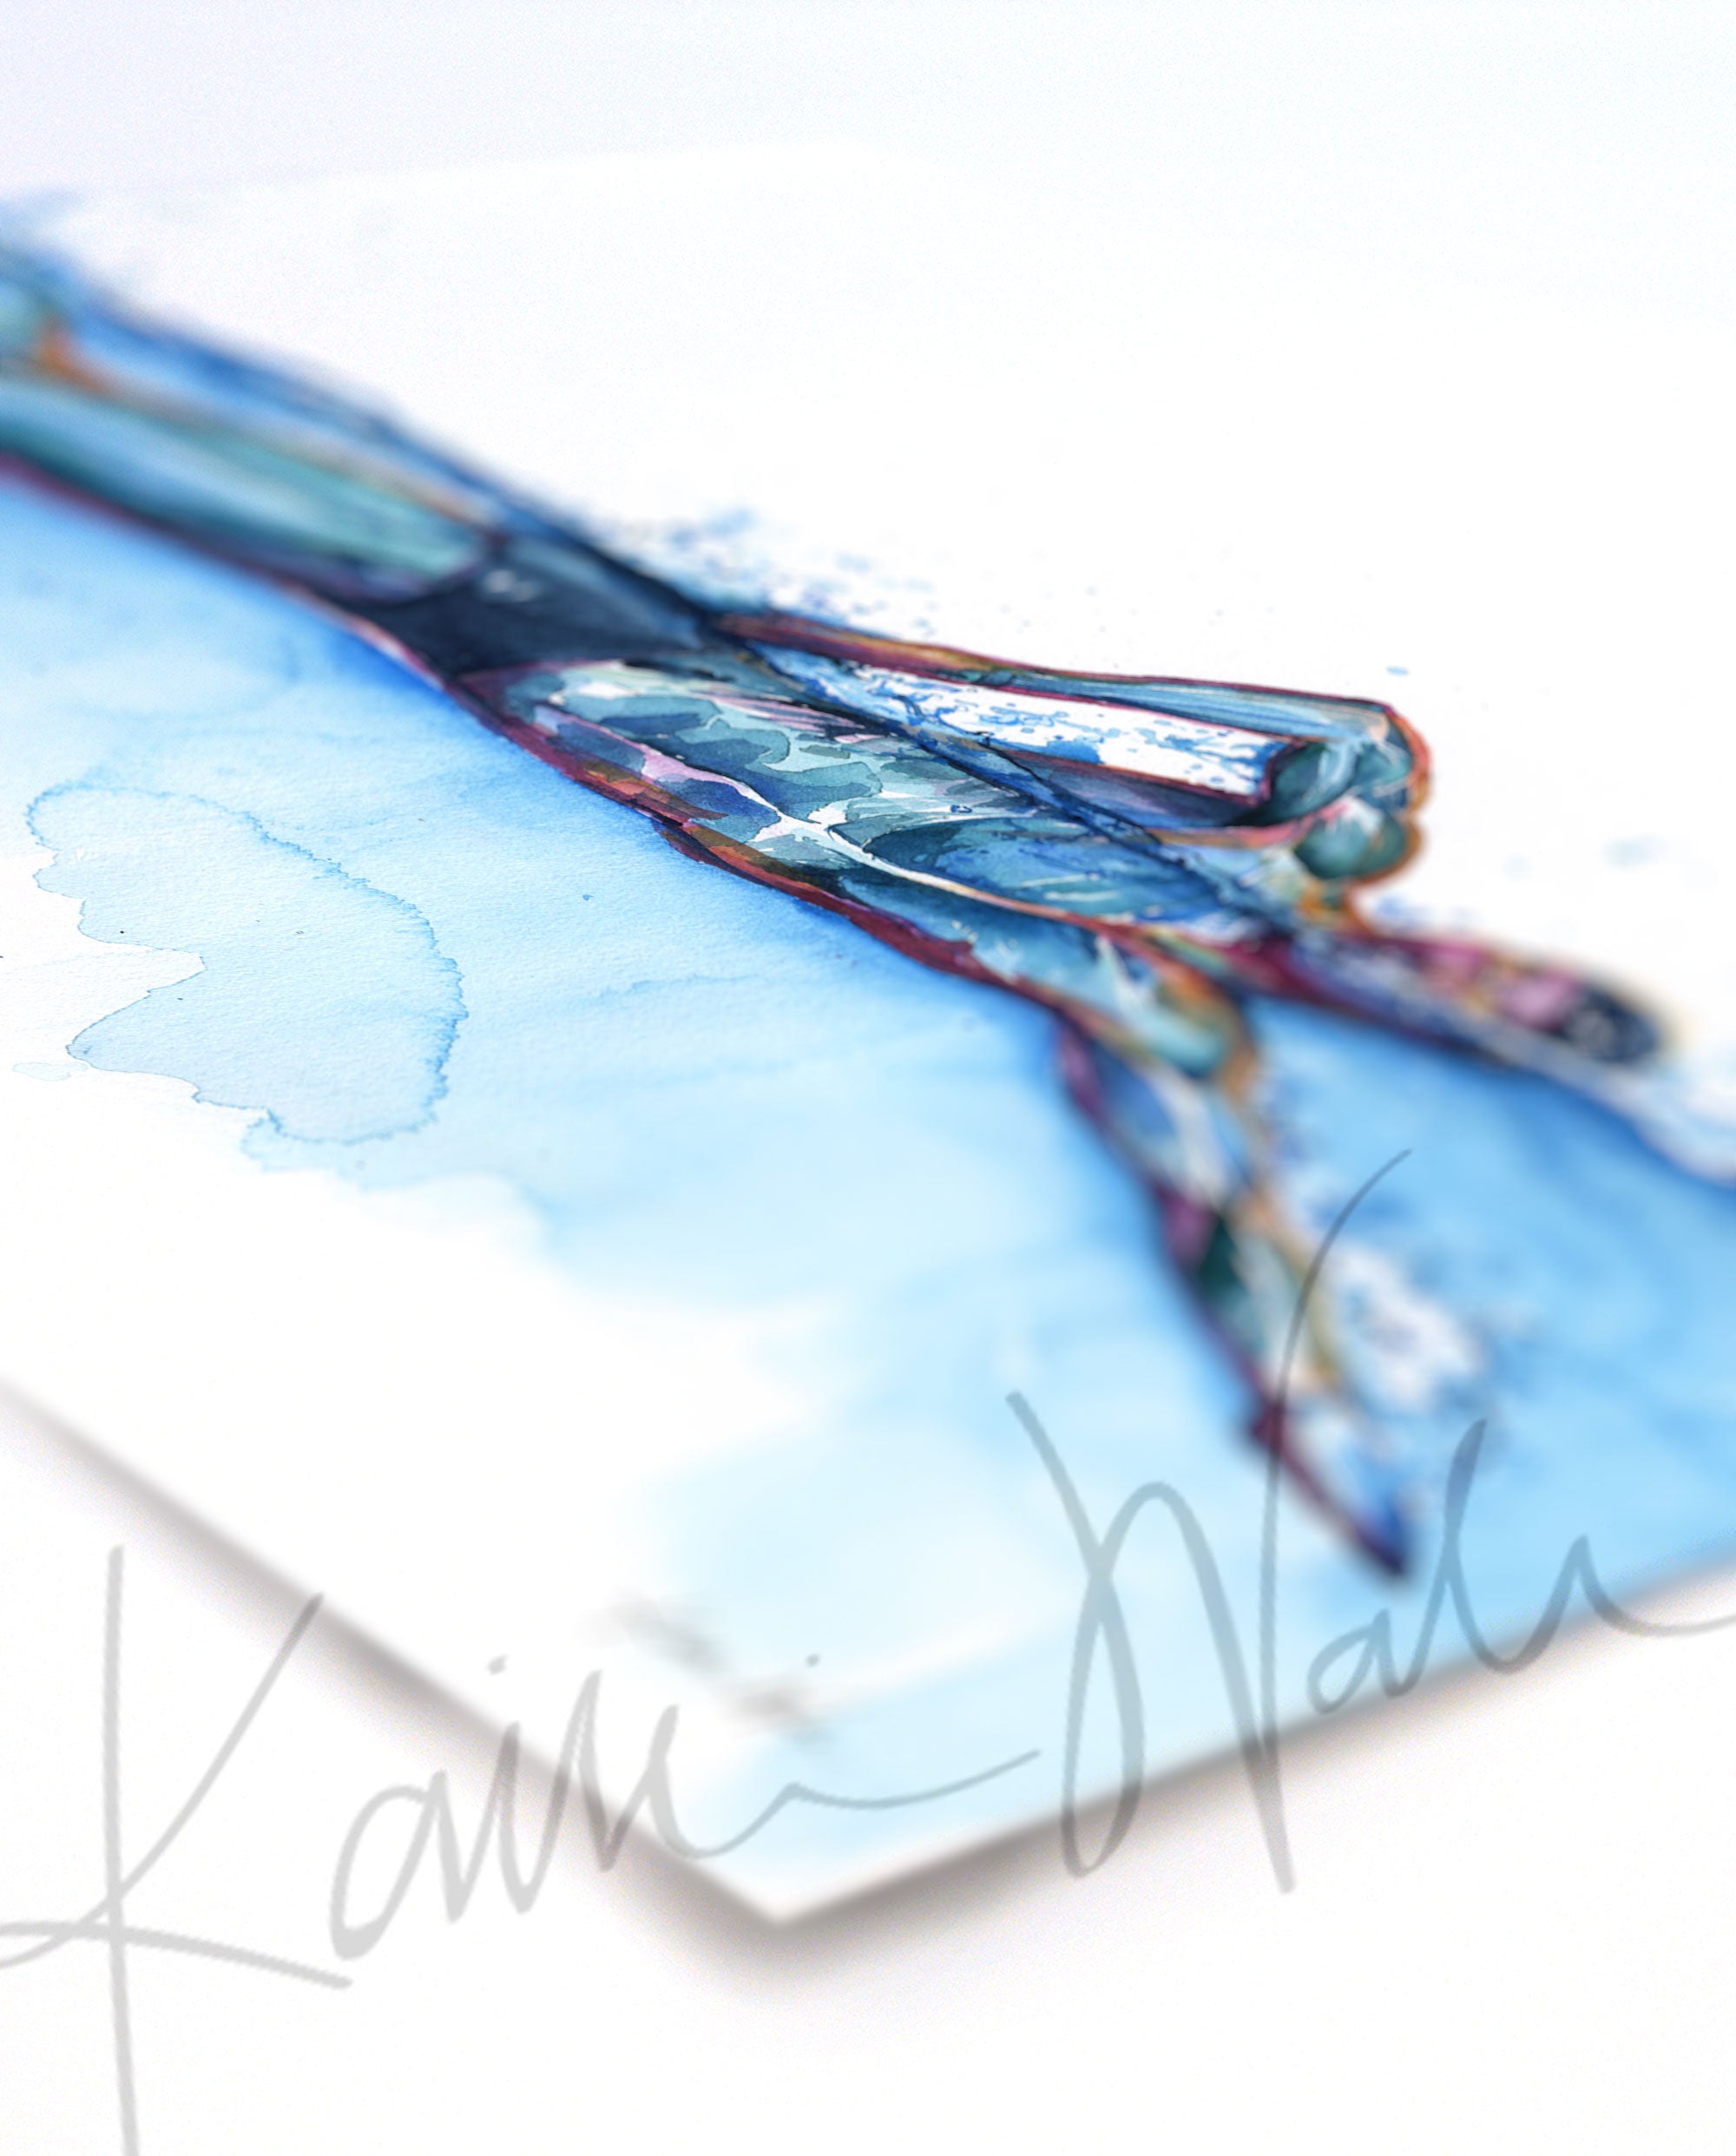 Angled view of a watercolor painting of a swimmer in mid stroke showing the swimmer’s muscular anatomy.